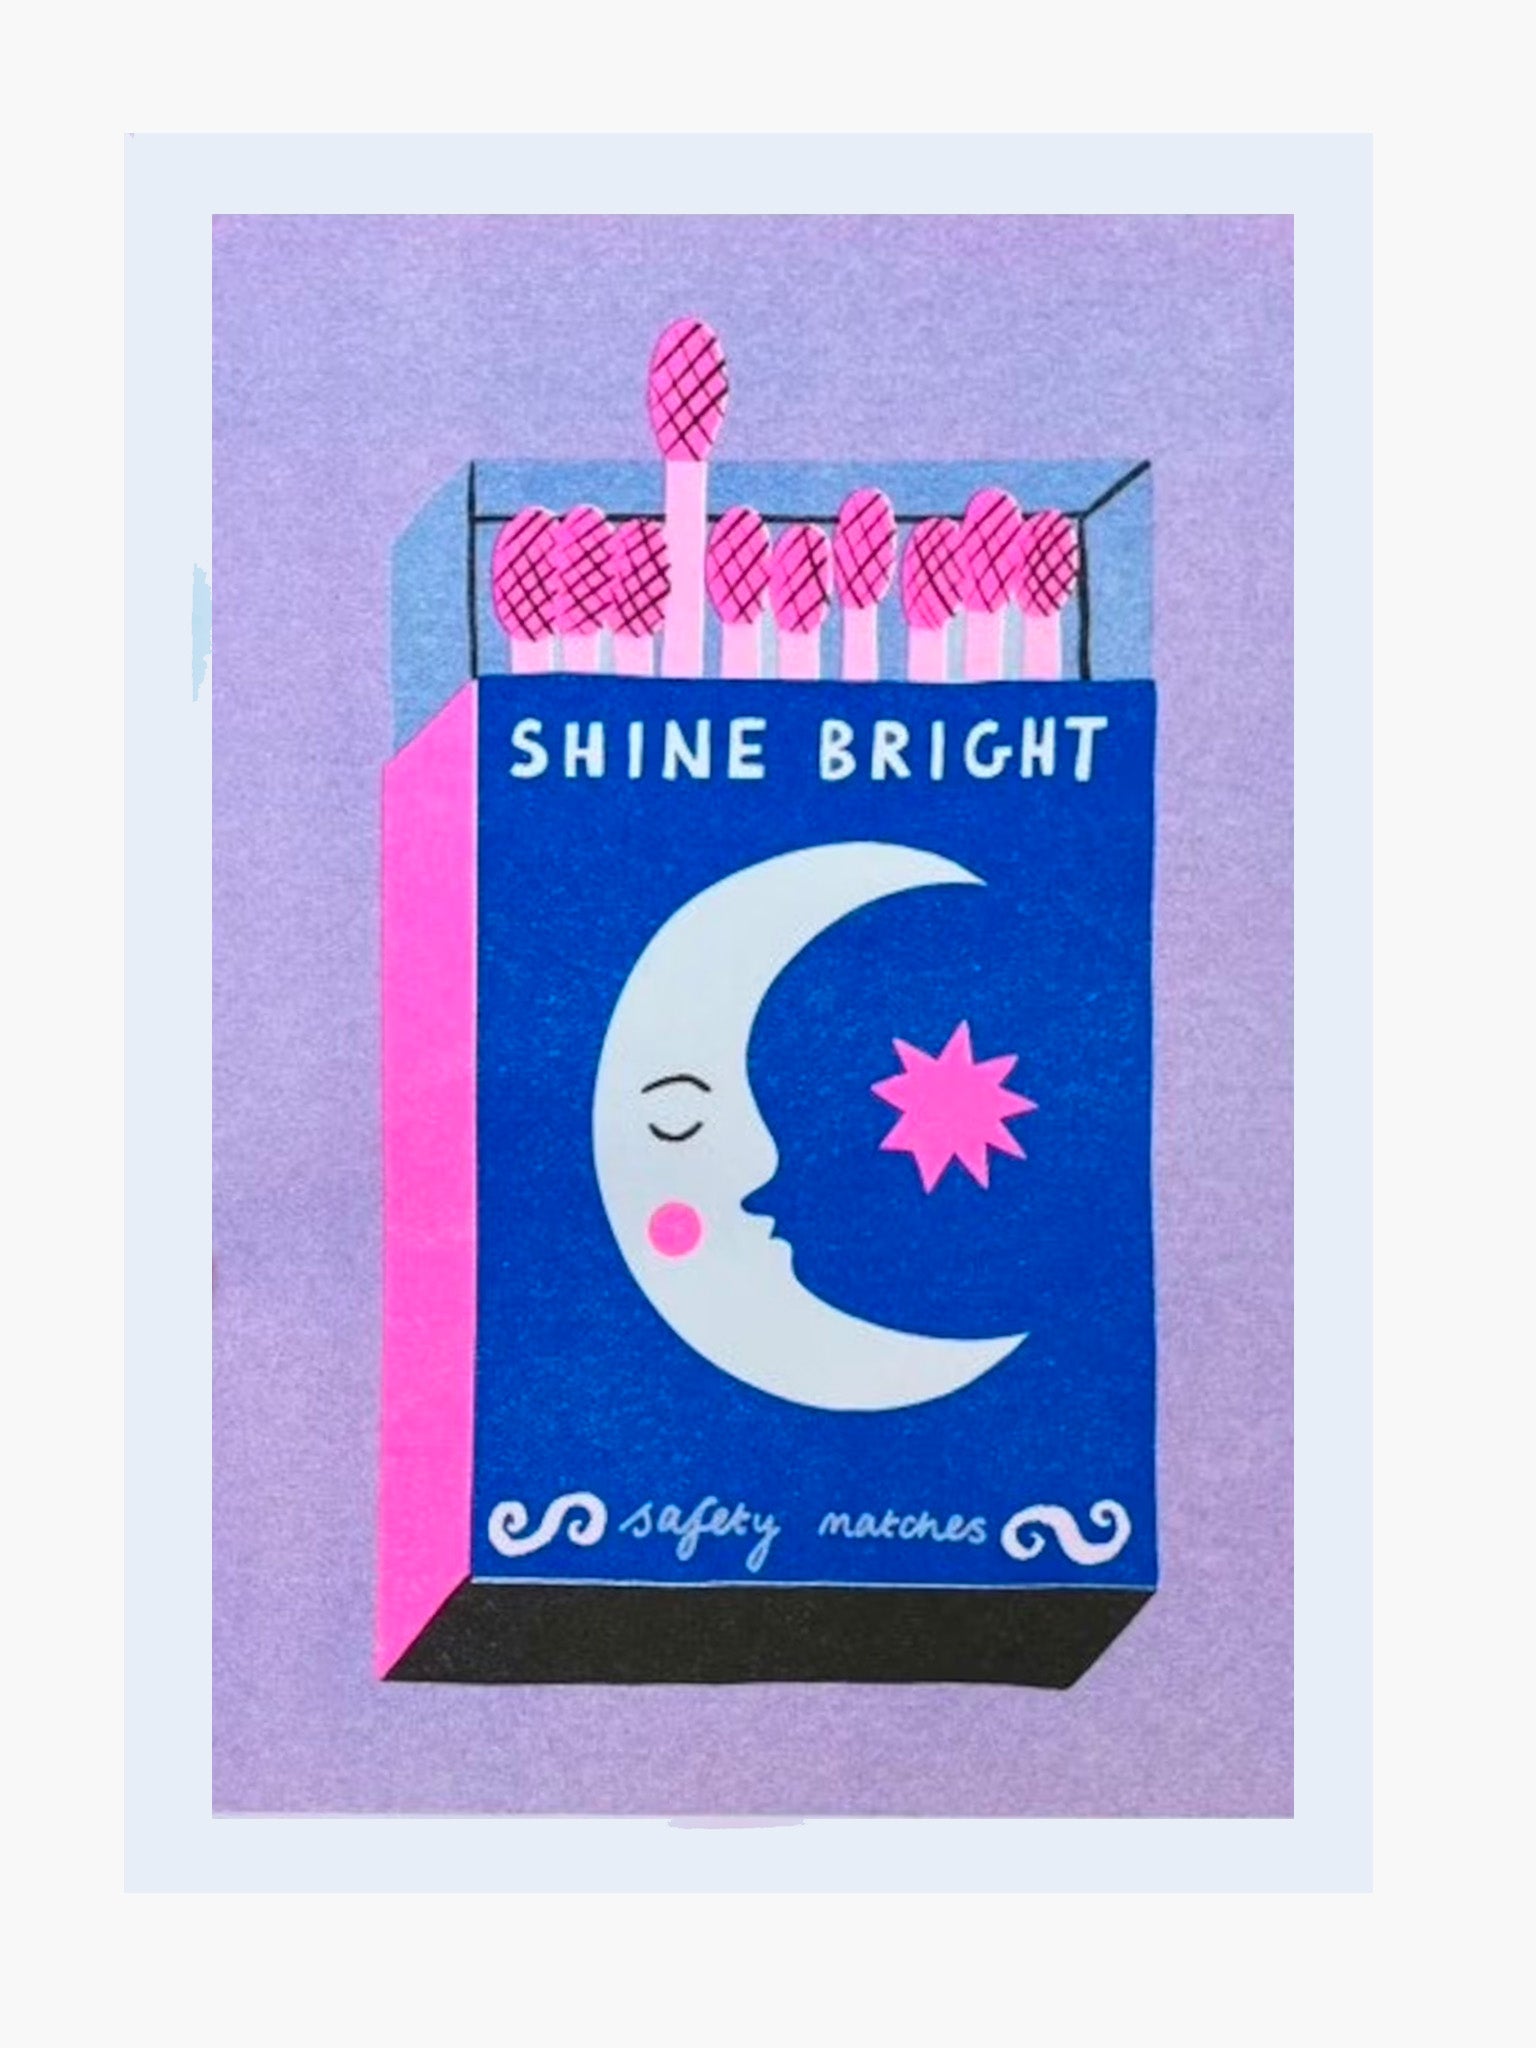 Shine Bright Matchbox by Amy Hastings – Risograph Print (A4)